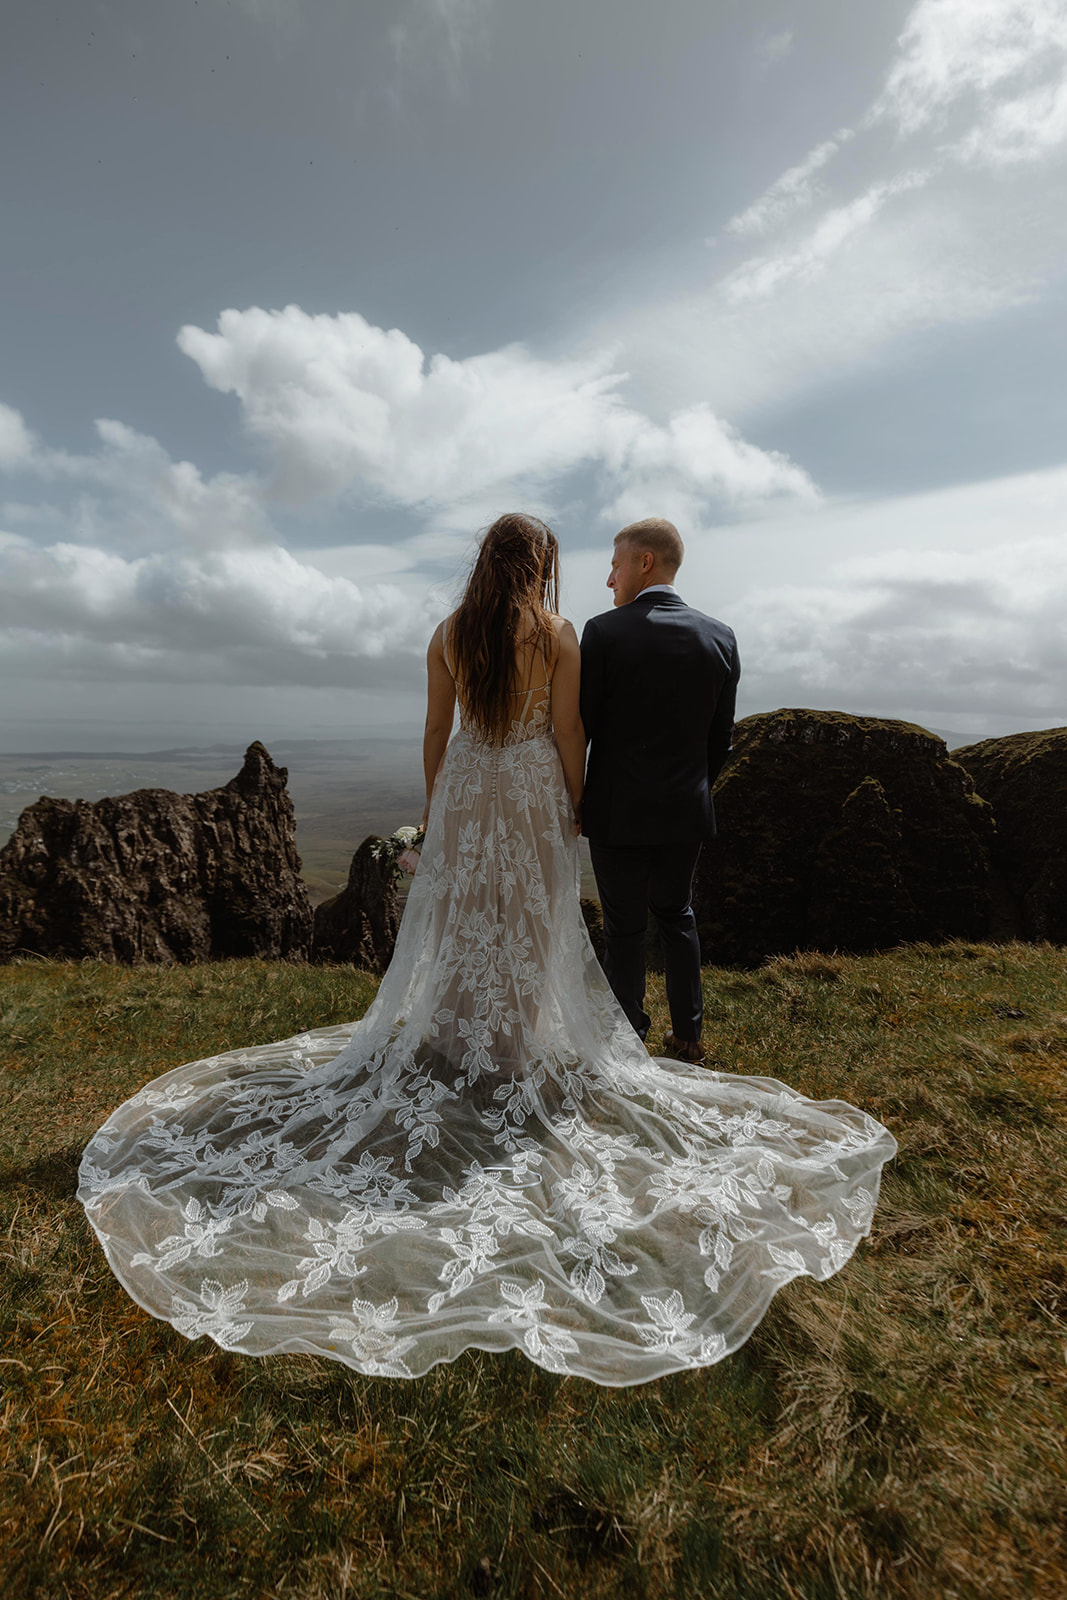 Emma and Matthew stand hand in hand as they admire the picturesque beauty of the Isle of Skye during their elopement day